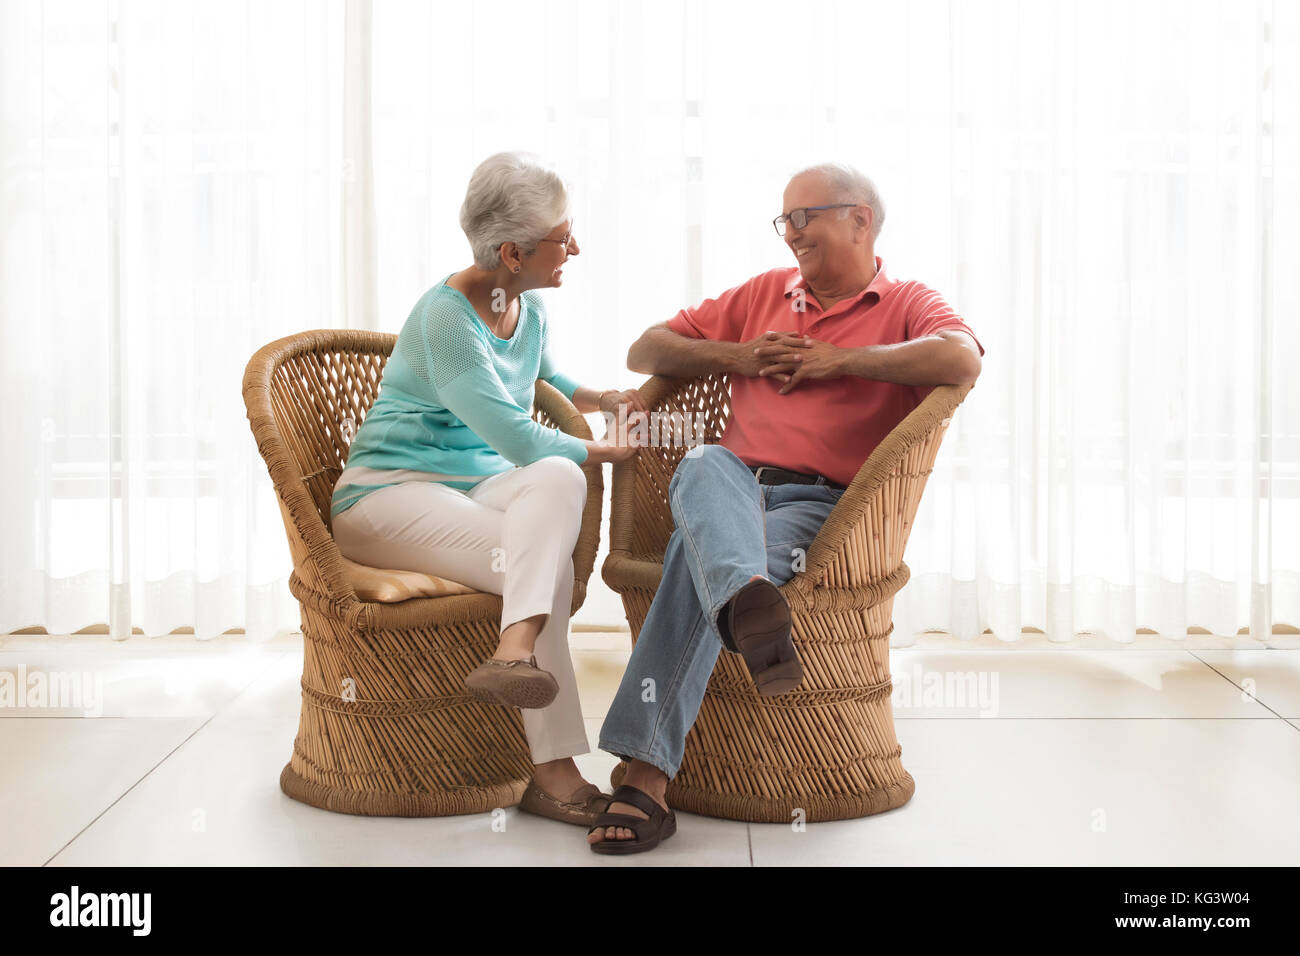 Senior couple sitting on wicker chair and talking Stock Photo